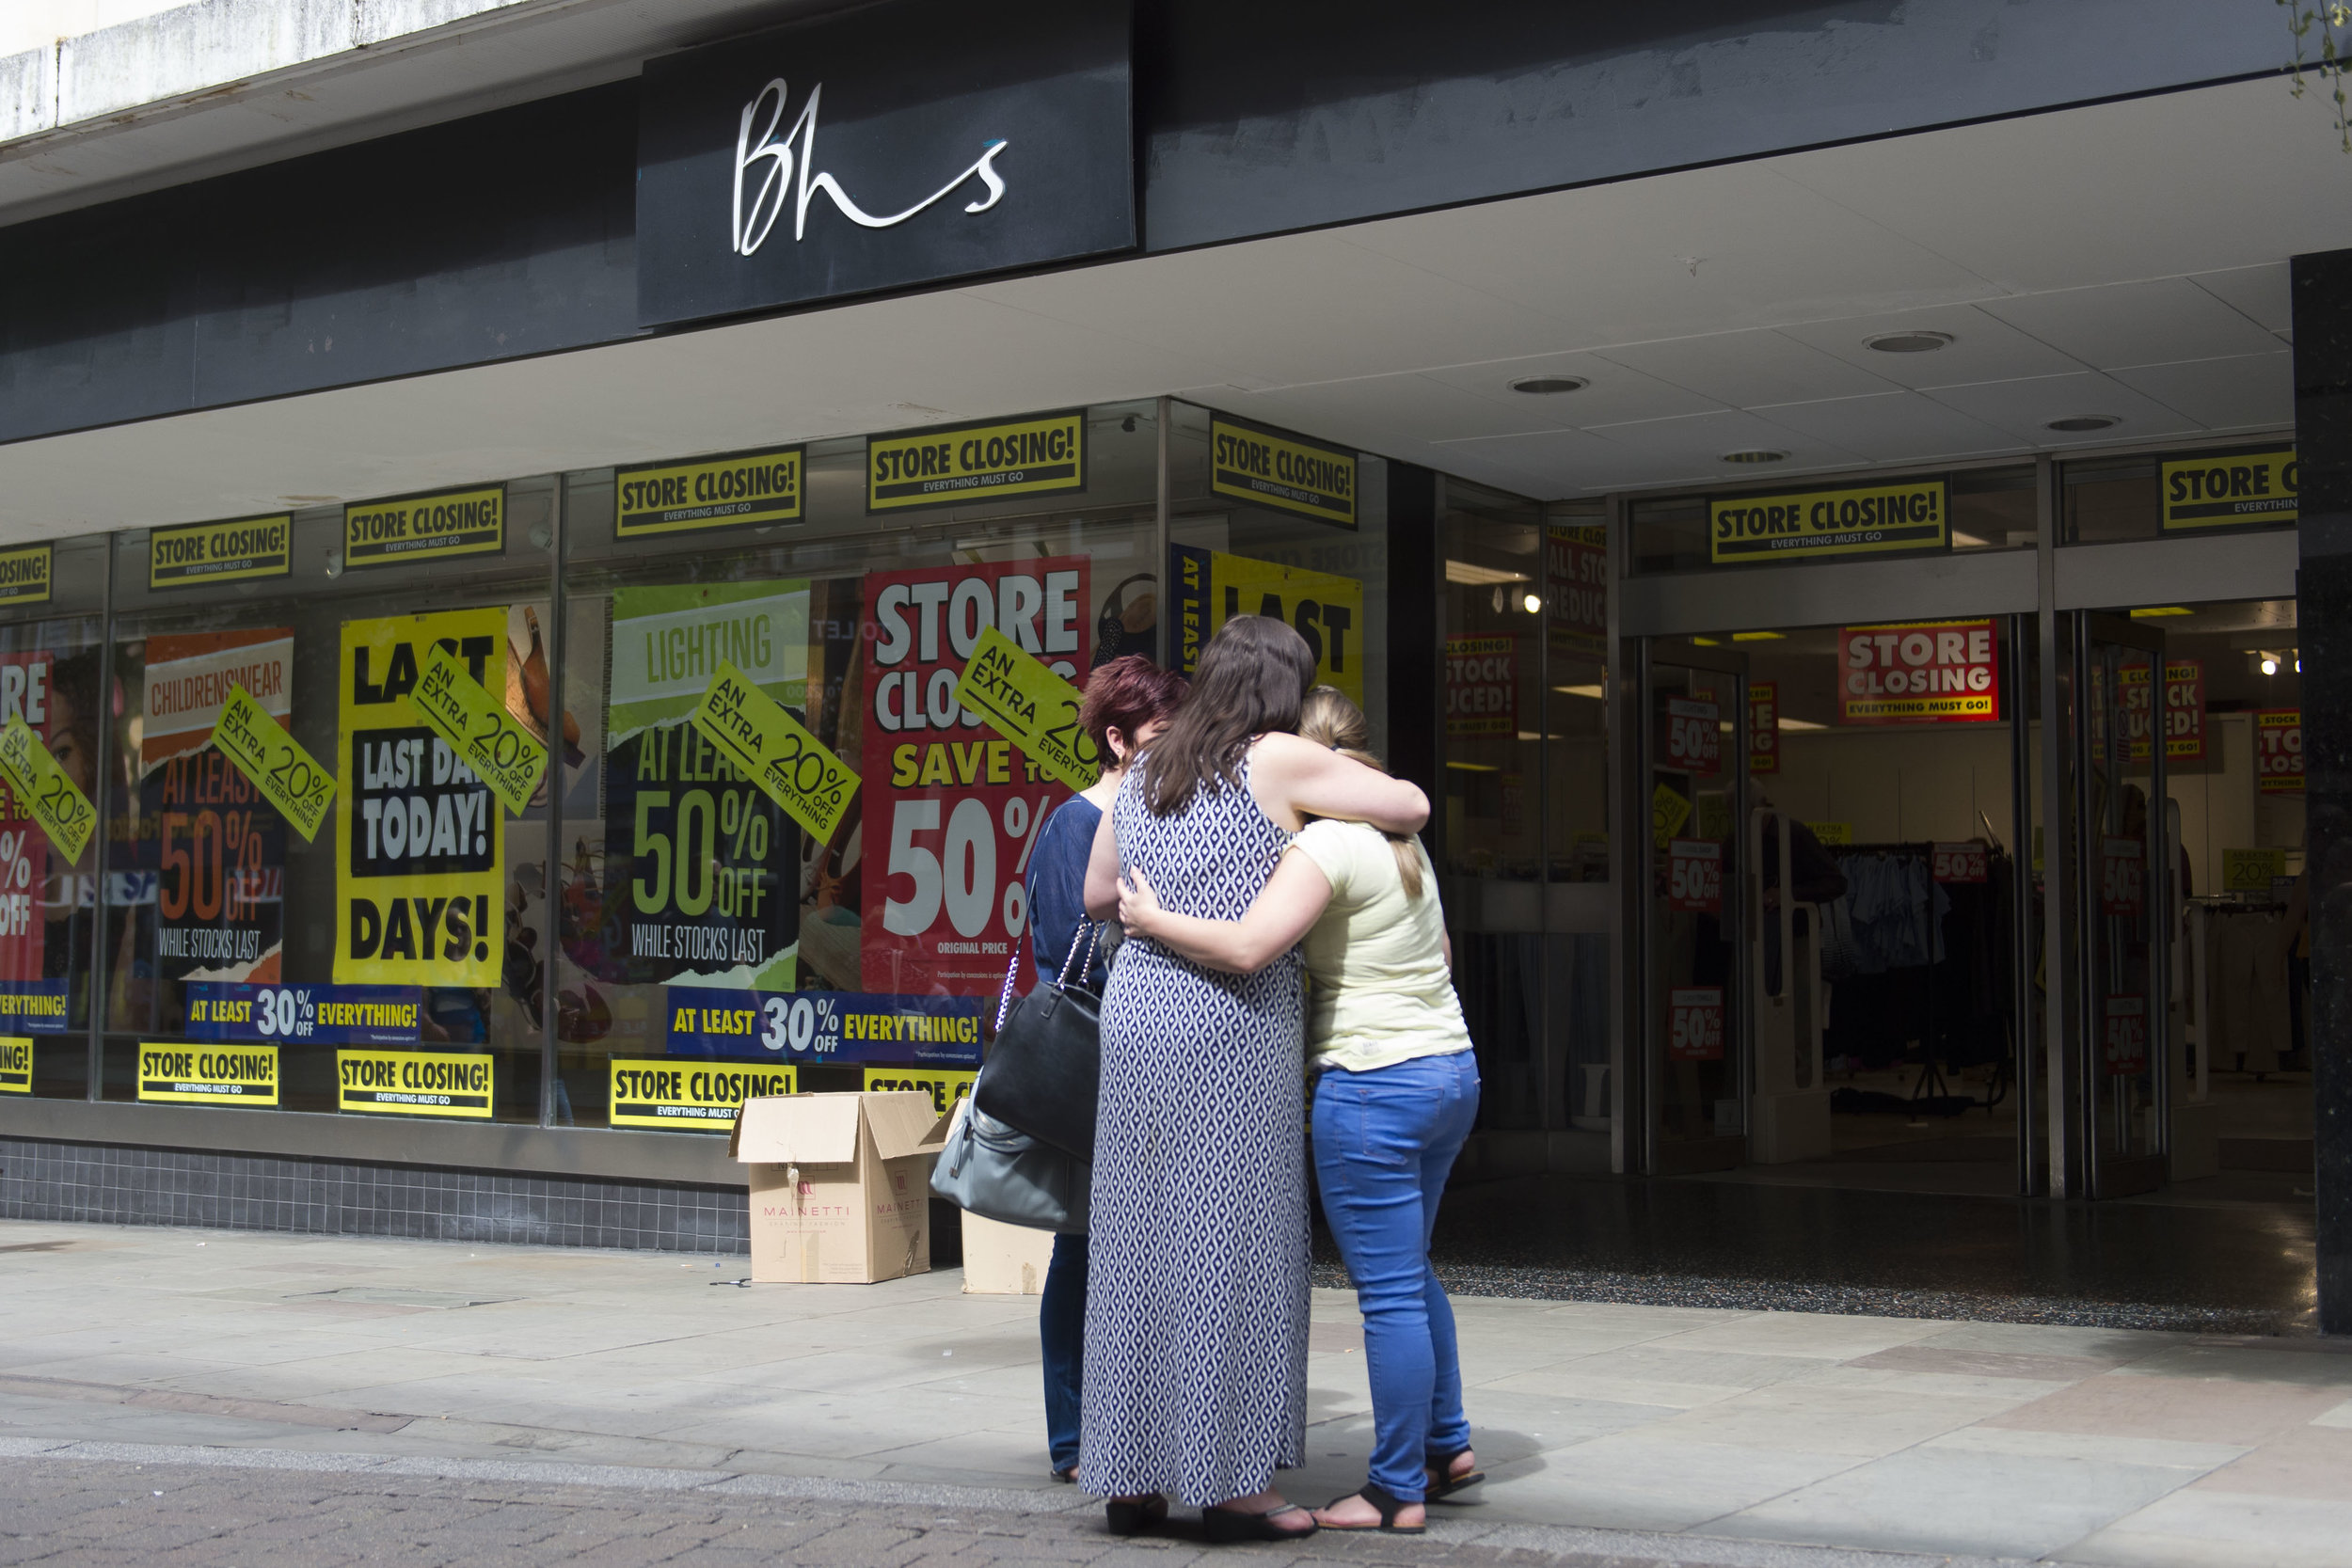  NEWPORT, WALES - JULY 23: Closure of the BHS (British Home Stores) store on Commercial Street on July 23, 2016 in Newport, Wales. The store is one of 20 stores across the UK to close today. The collapse of BHS put 11,000 UK jobs at risk and left a £